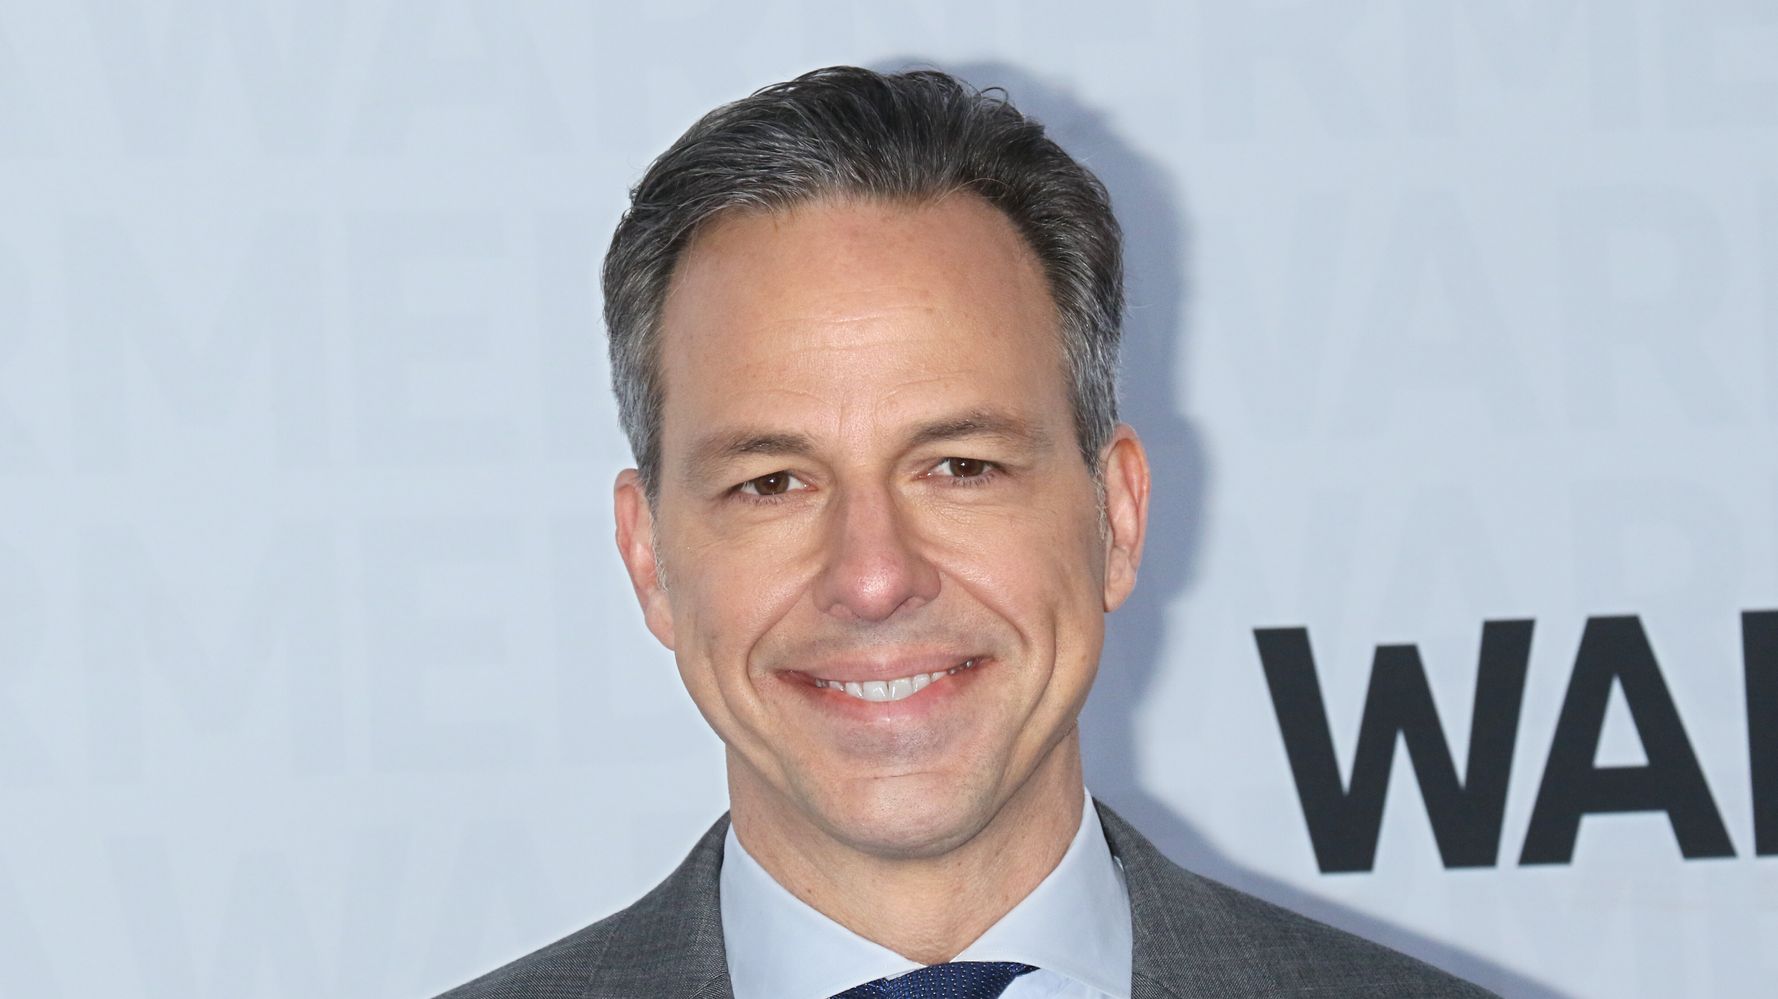 Jake Tapper Criticizes Colleague Chris Cuomo's Conduct With Brother Andrew